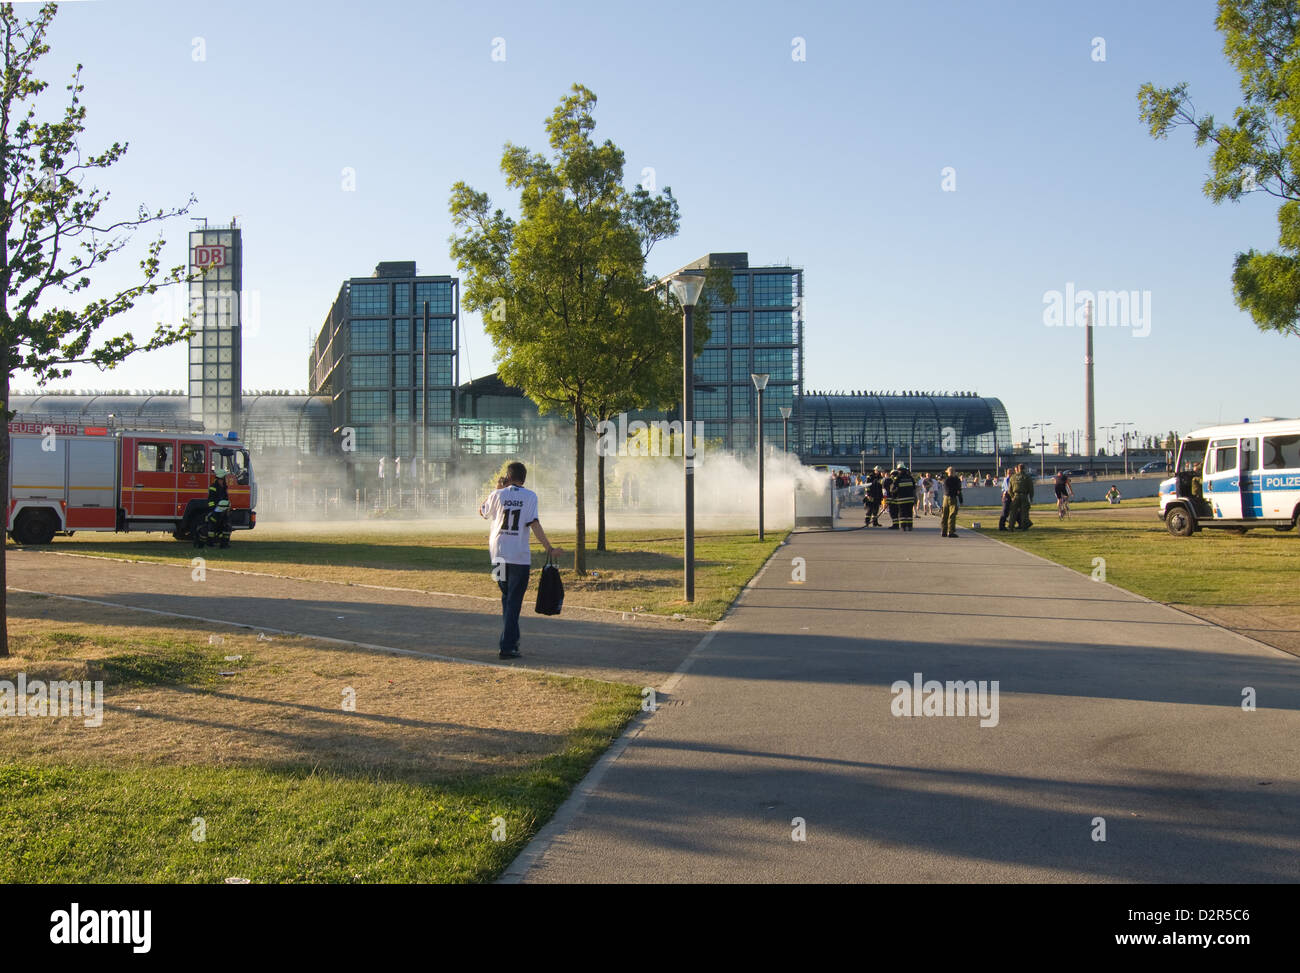 Burning garbage container in front of the main train station Stock Photo